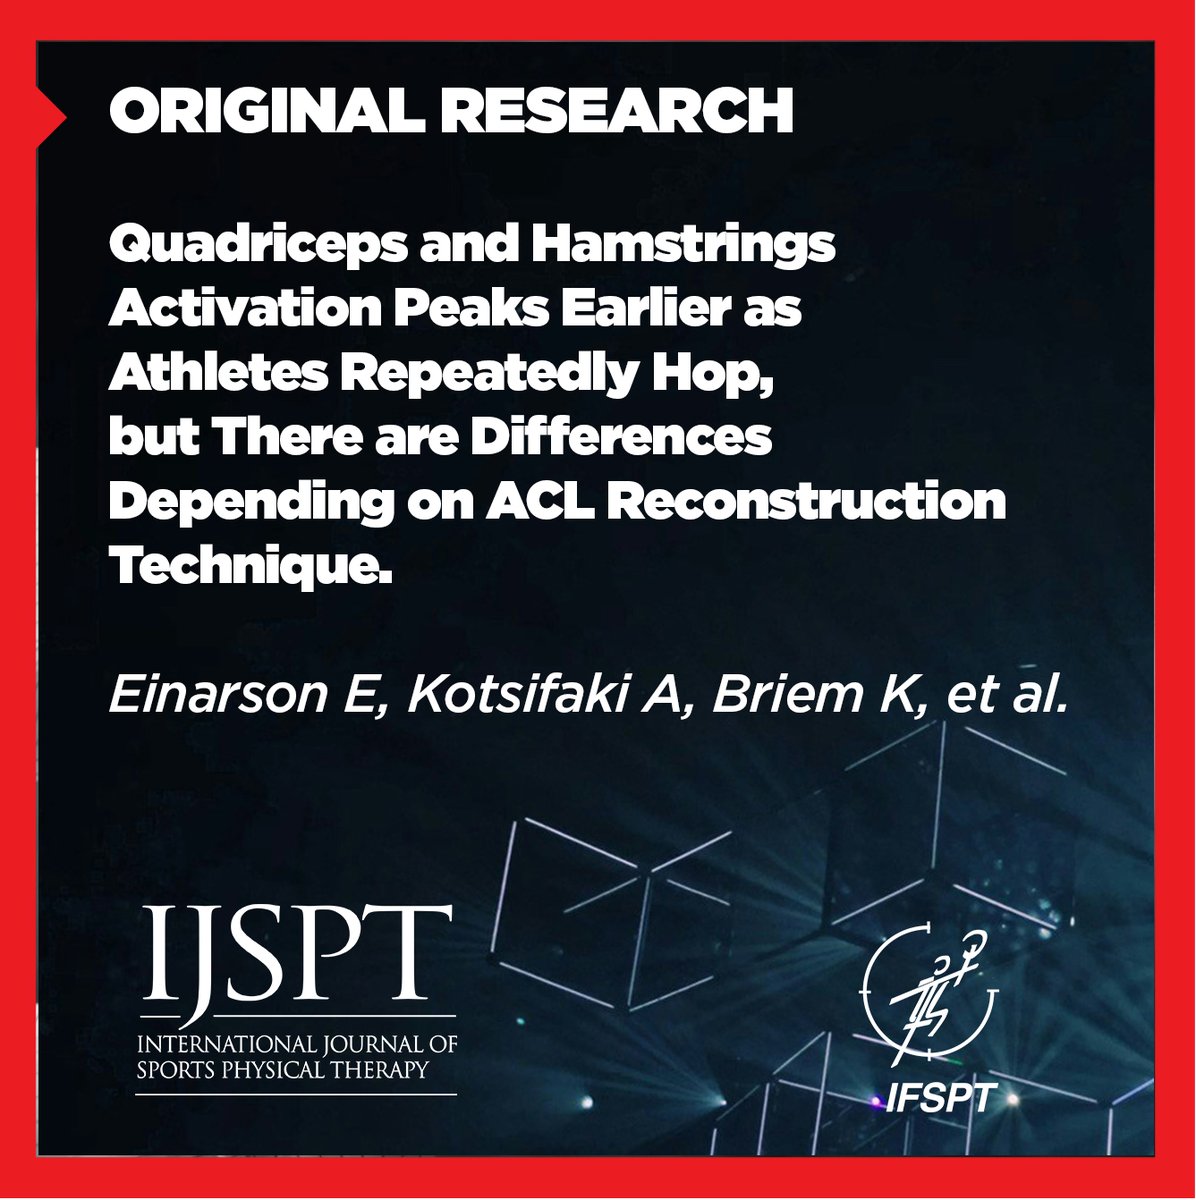 ORIGINAL RESEARCH: Quadriceps and Hamstrings Activation Peaks Earlier as Athletes Repeatedly Hop, but There are Differences Depending on ACL Reconstruction Technique. Einarson E, Kotsifaki A, Briem K, et al. ijspt.org/quadriceps-and…